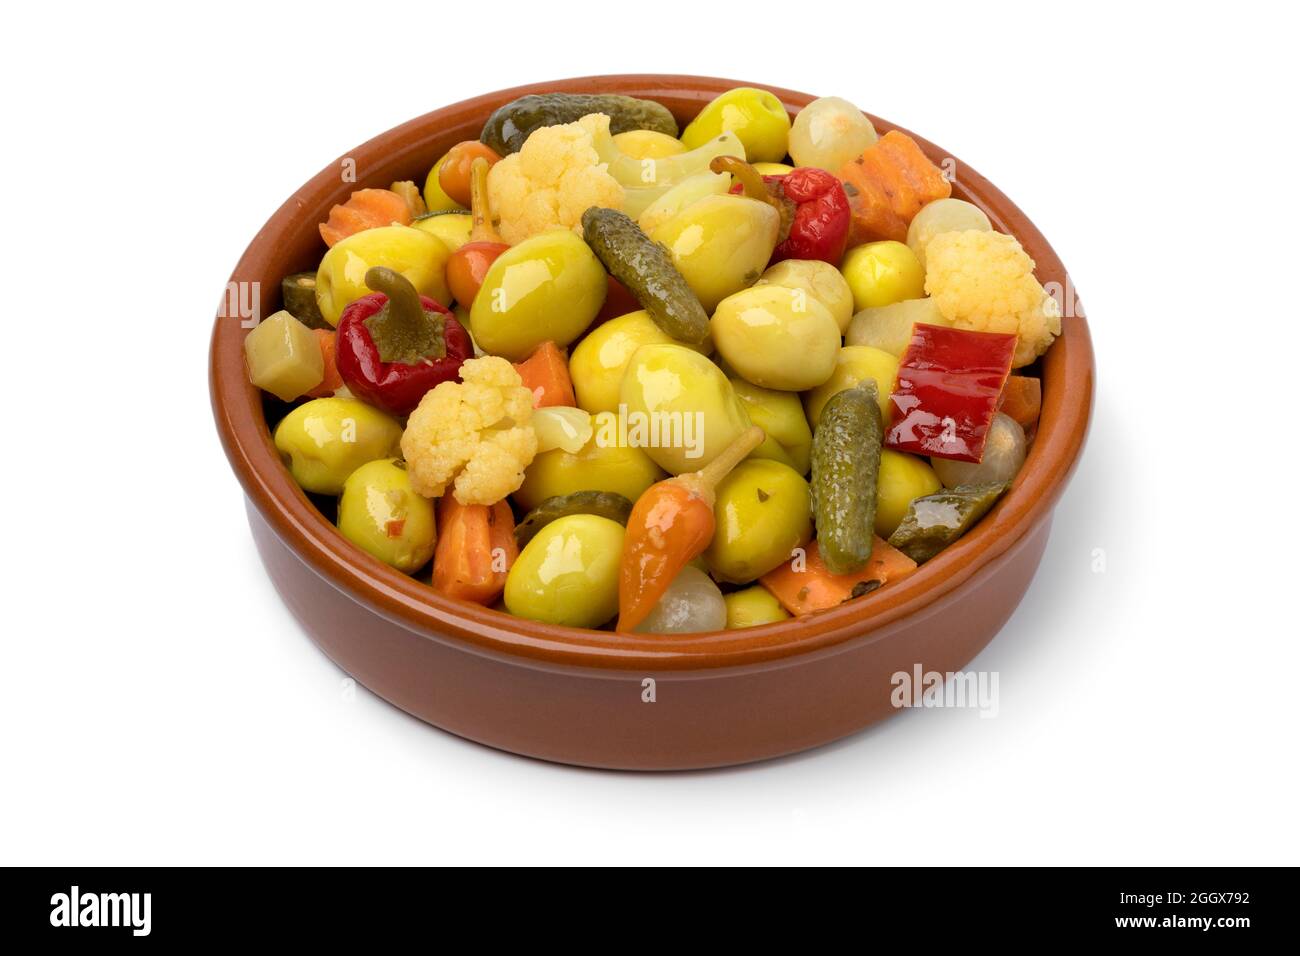 Traditional bowl with green olives and vegetables for a snack, appetizer or side dish isolated on white background Stock Photo